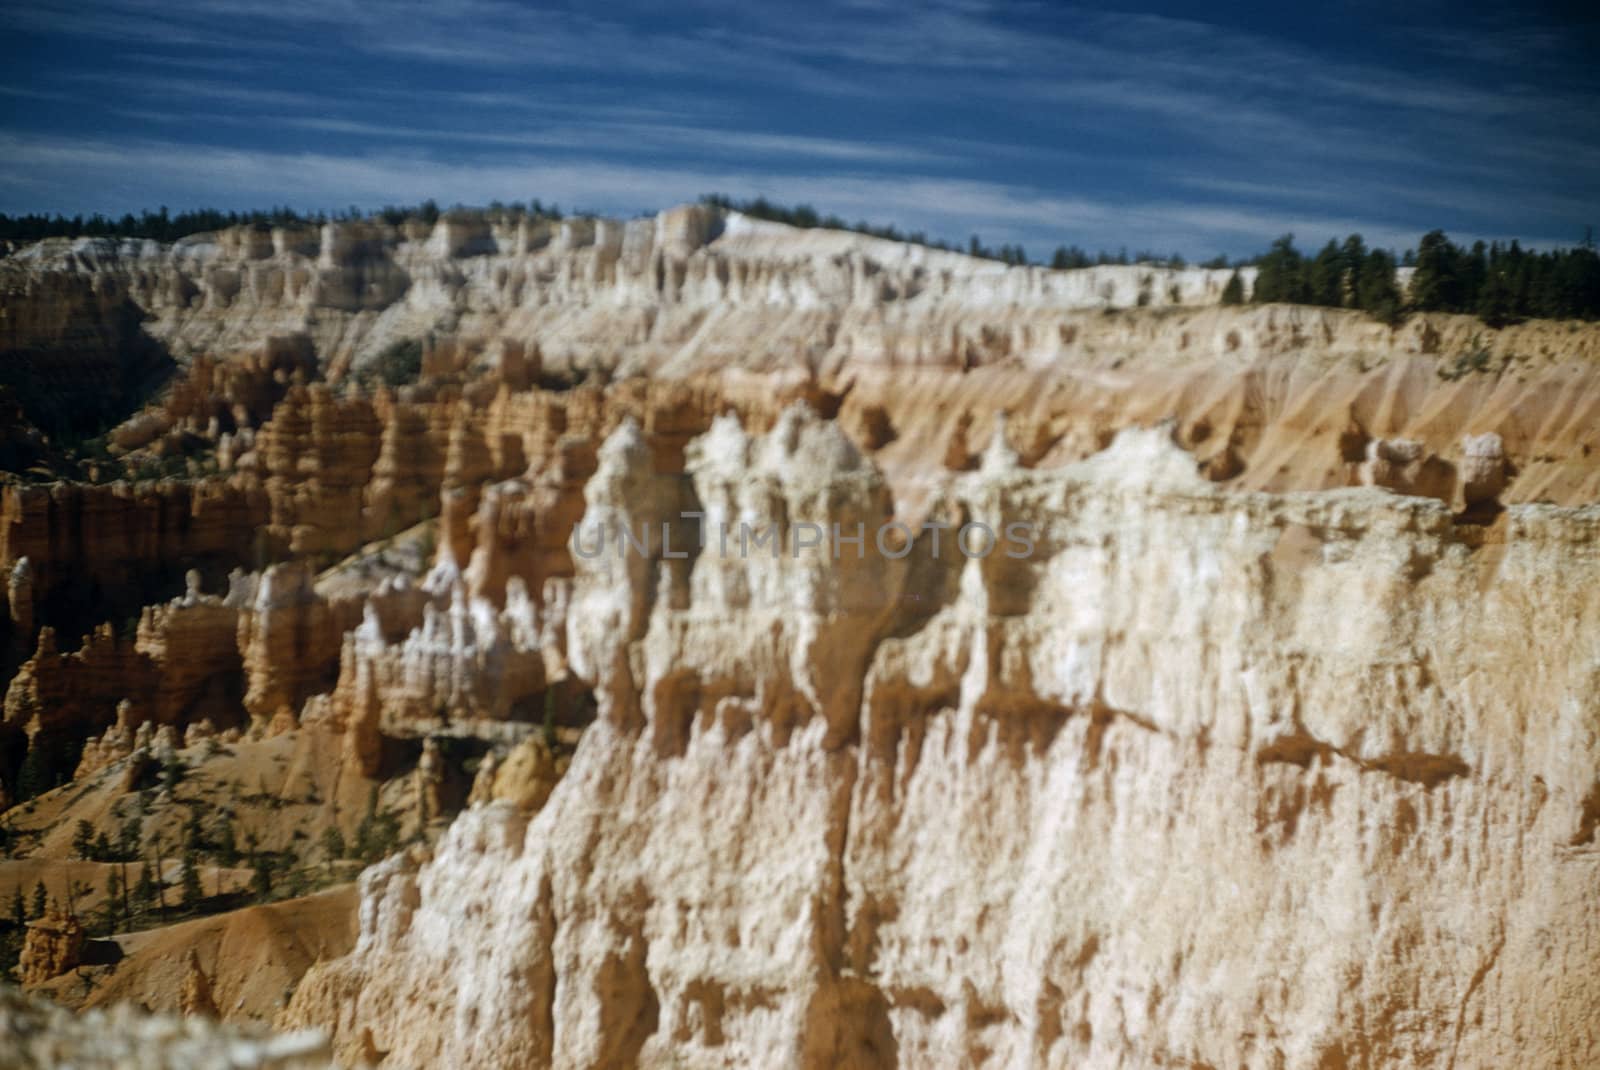 View of sedimentary rock formations in Bryce canyon national park, USA